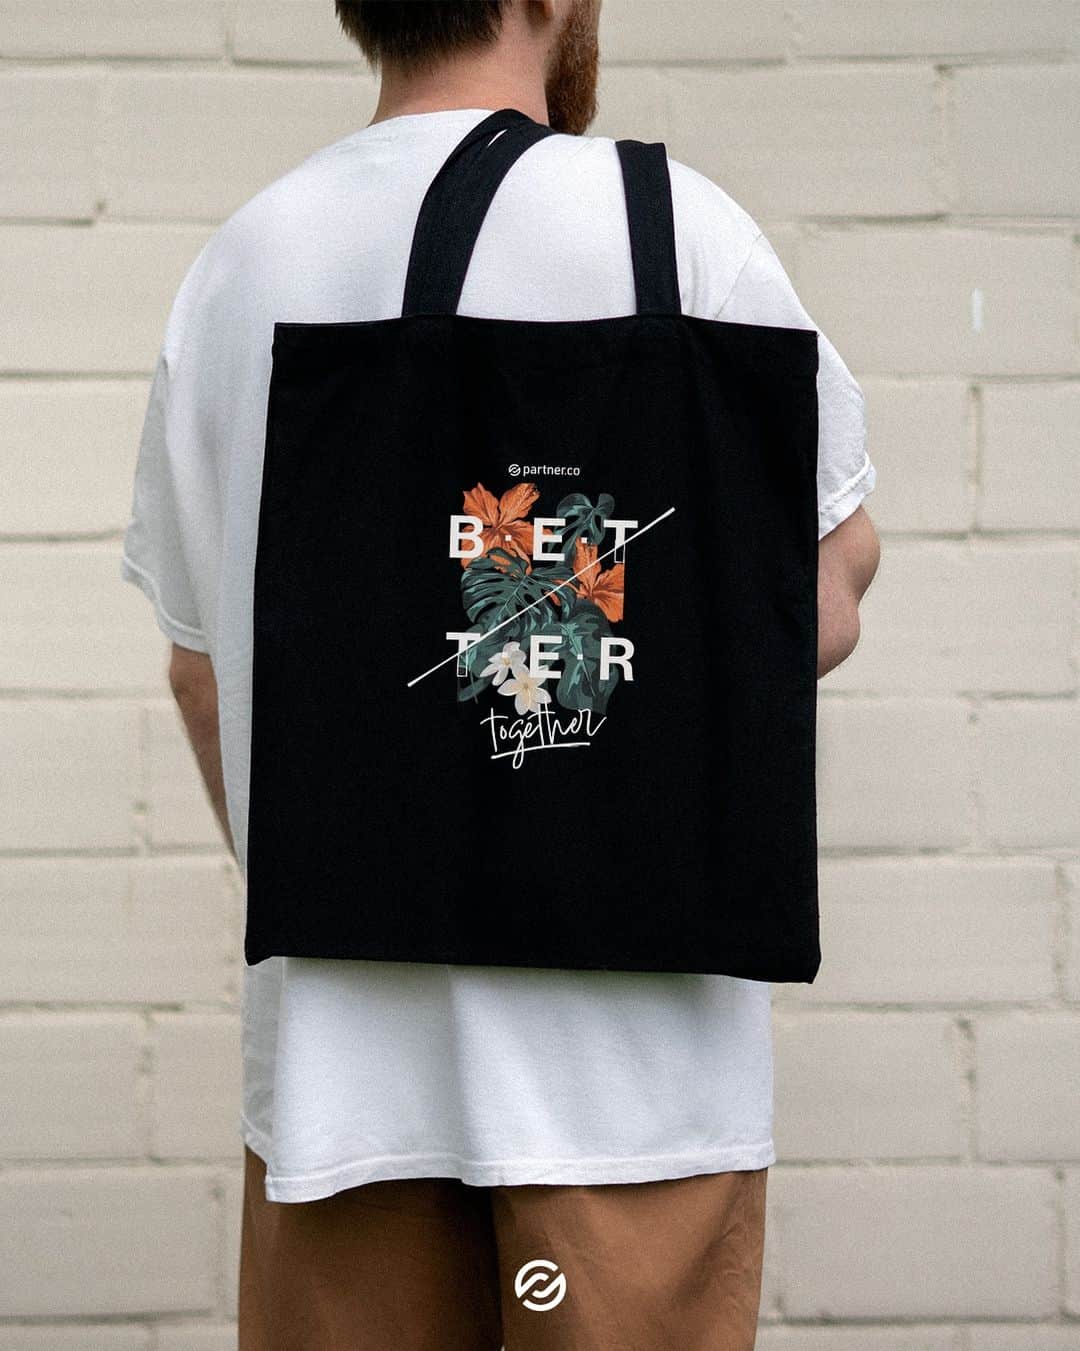 ARIIX Officialのインスタグラム：「📣 TOTE BAG GIVEAWAY   We’ve got the perfect accessory for you — and it’s FREE this week!  ENTER TO WIN it before 11:59 p.m. MT Dec. 6, 2023. Here’s how:  📣Follow @PartnerCoGlobal, @JohnWadsworthPC and @DarrenZobrist 📣Like this giveaway post 📣Tag a friend in the comments 📣Get bonus entries for sharing this to your story  #PartnerCo #Giveaway #ToteBag   This promotion is not sponsored, administered or associated with Instagram in any way. The winner will be notified on Dec. 7, 2023, via a direct message from @PartnerCoGlobal. The winner has 48 hours to claim the prize, or a new winner will be chosen. Open to all U.S. and Canada residents (excluding Quebec), 18 years of age and older.」